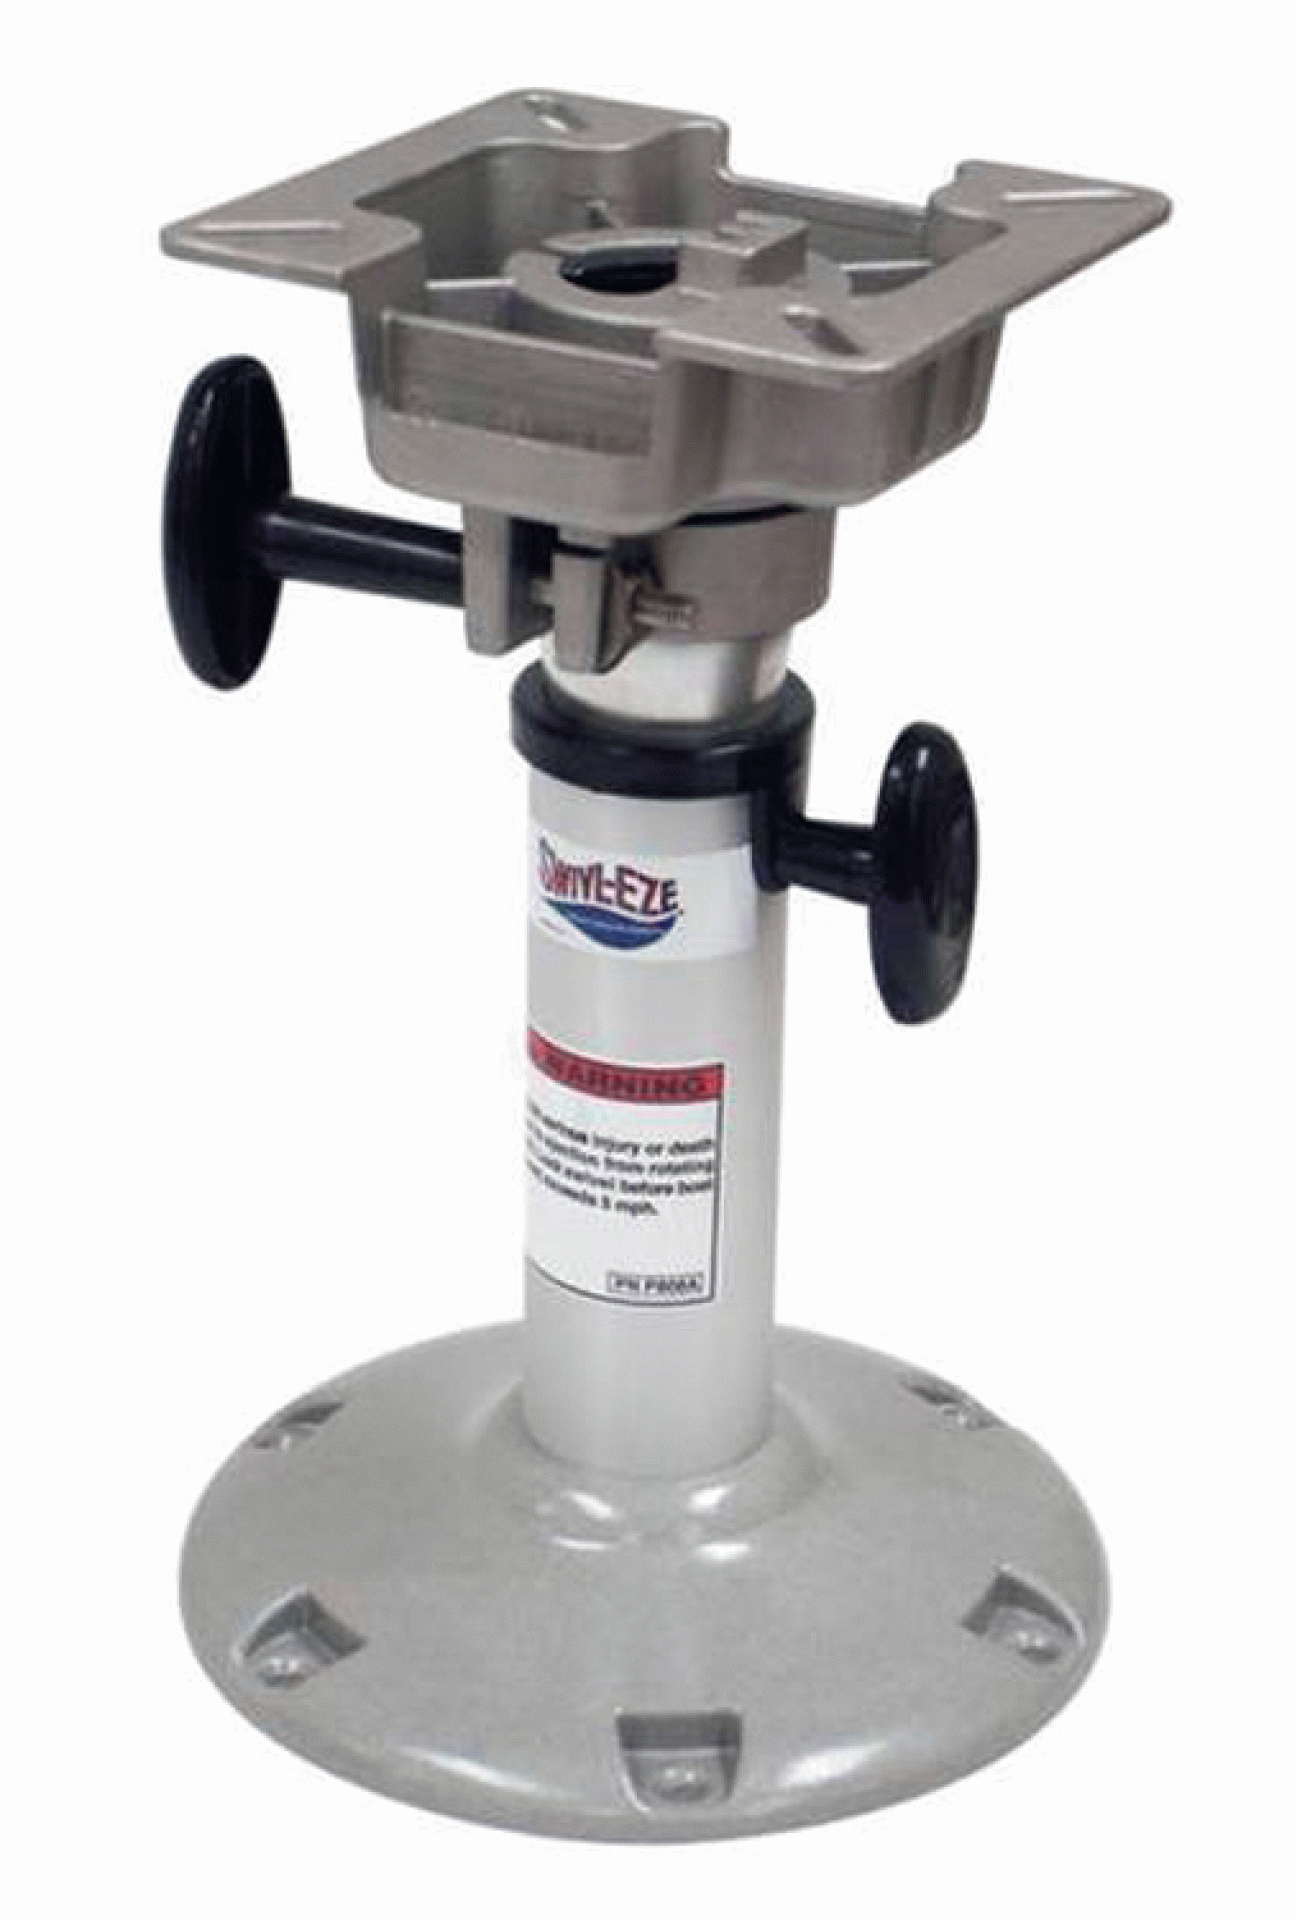 ATTWOOD CORPORATION | 2385400 | LAKESPORT BELL PEDESTAL ADJUSTABLE W/H SEAT MOUNT MANUAL 14" - 20" HEIGHT ANODIZED